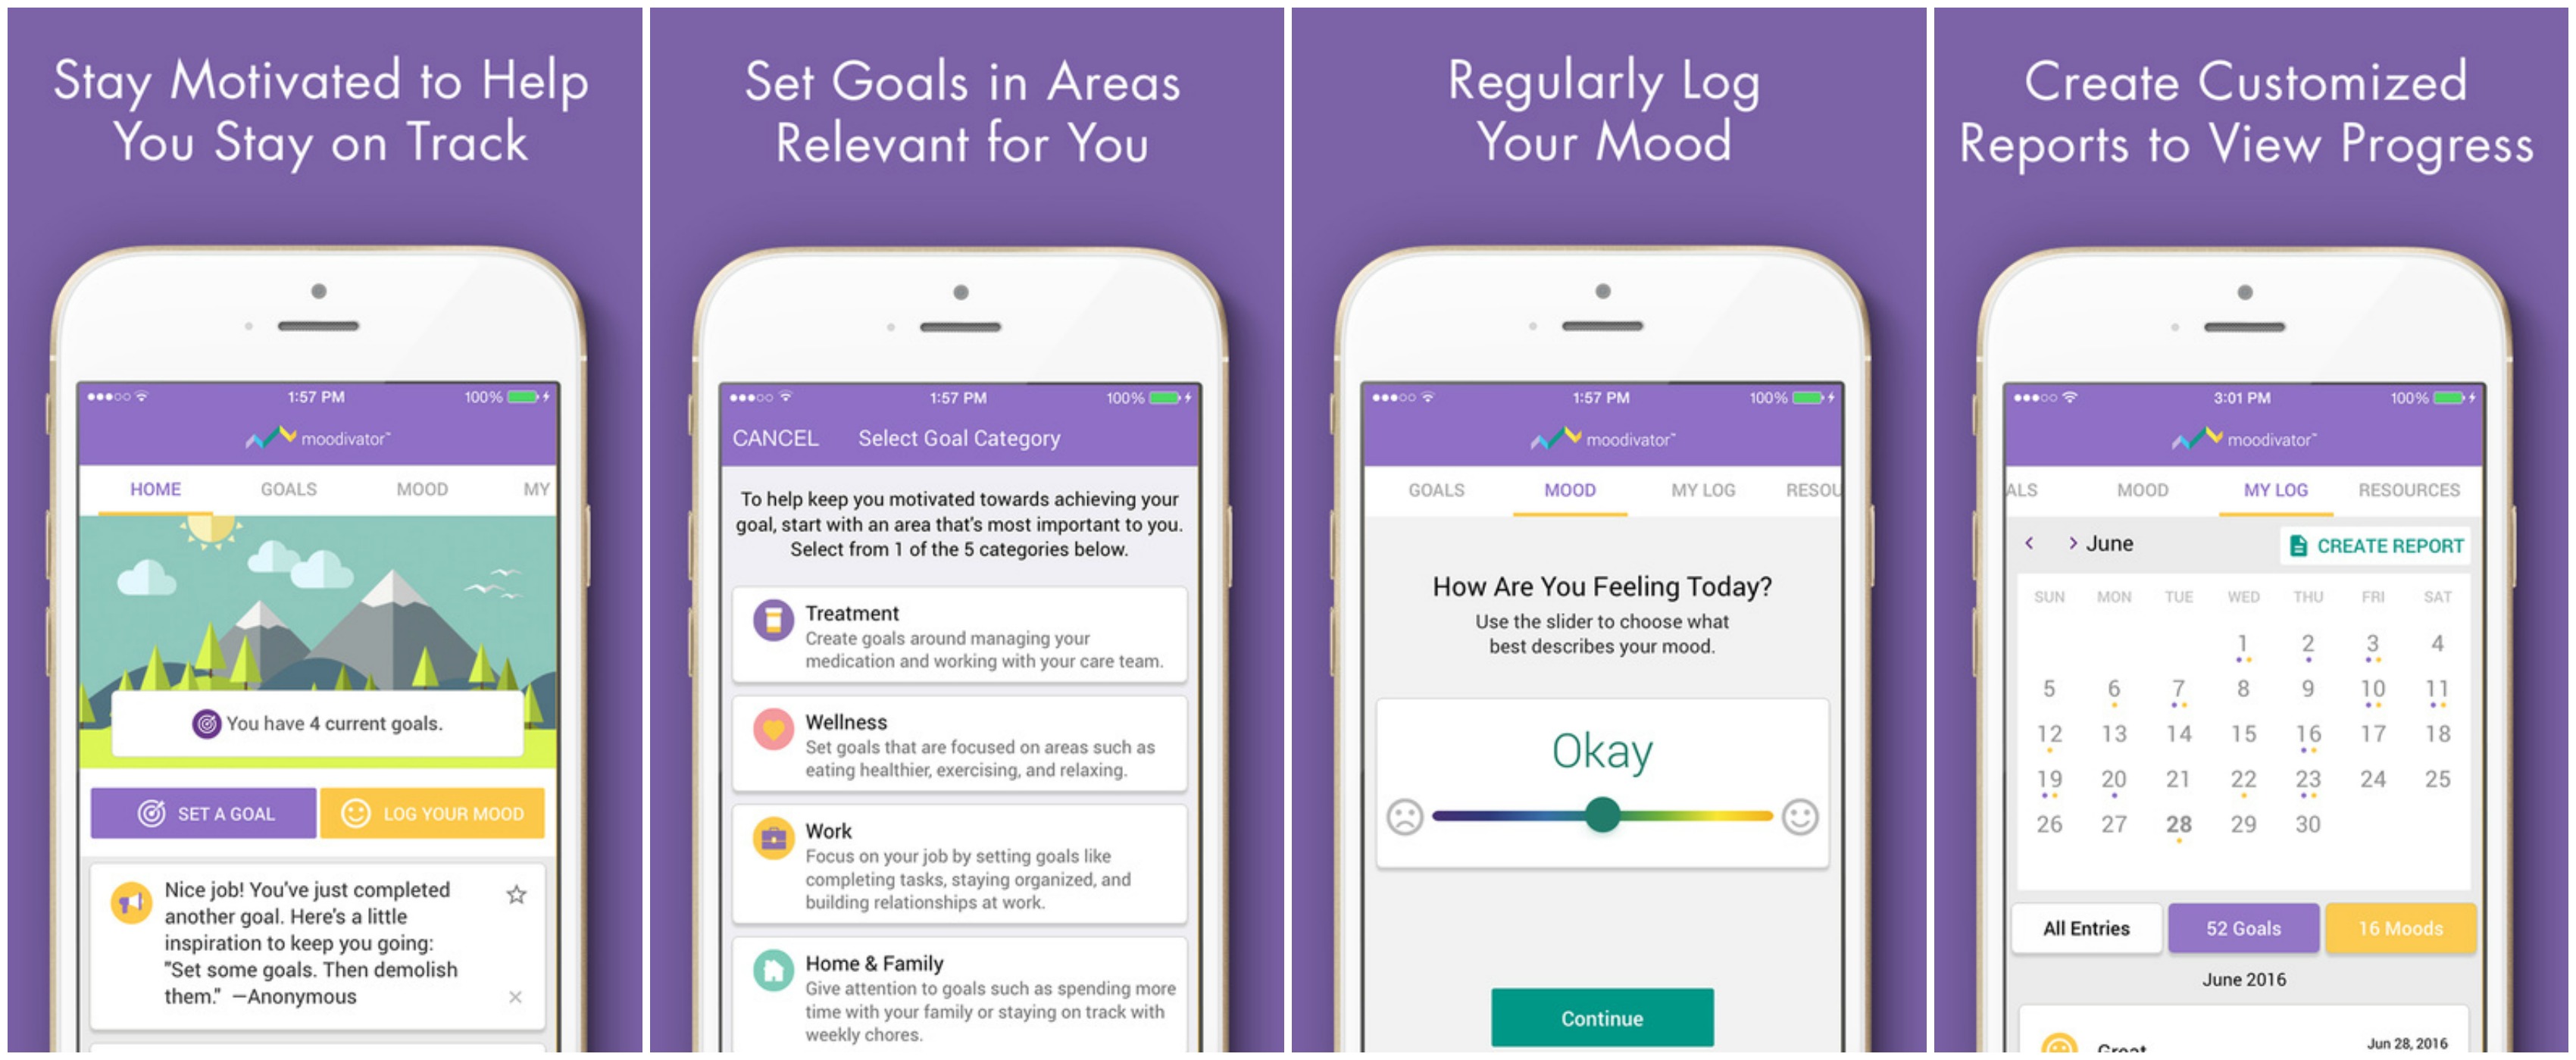 the moodivator app can help those with depression manage their moods and care #ad #pfizer #depression